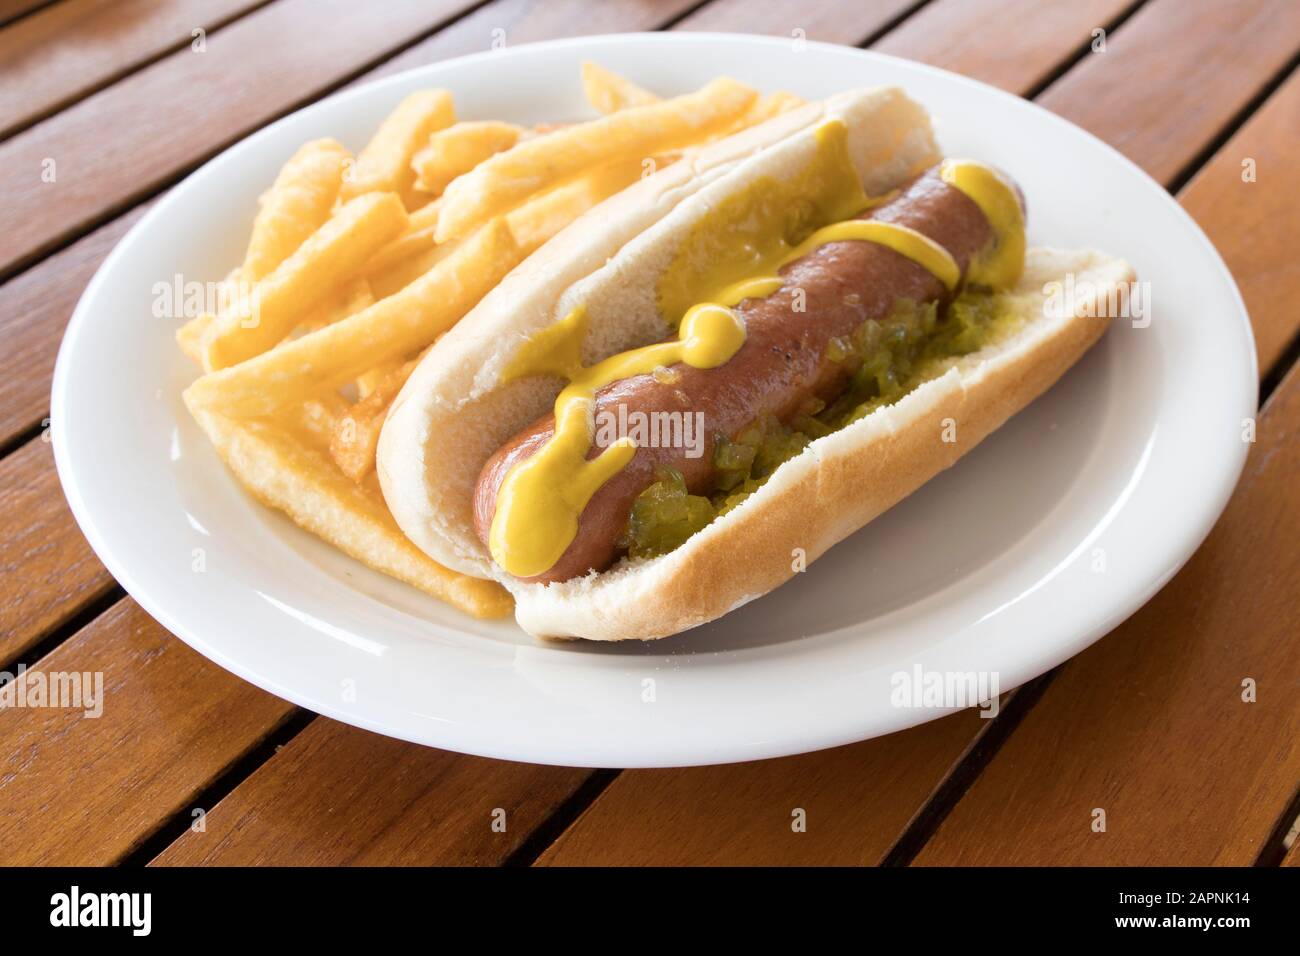 Hot Dog with French Fries Stock Photo